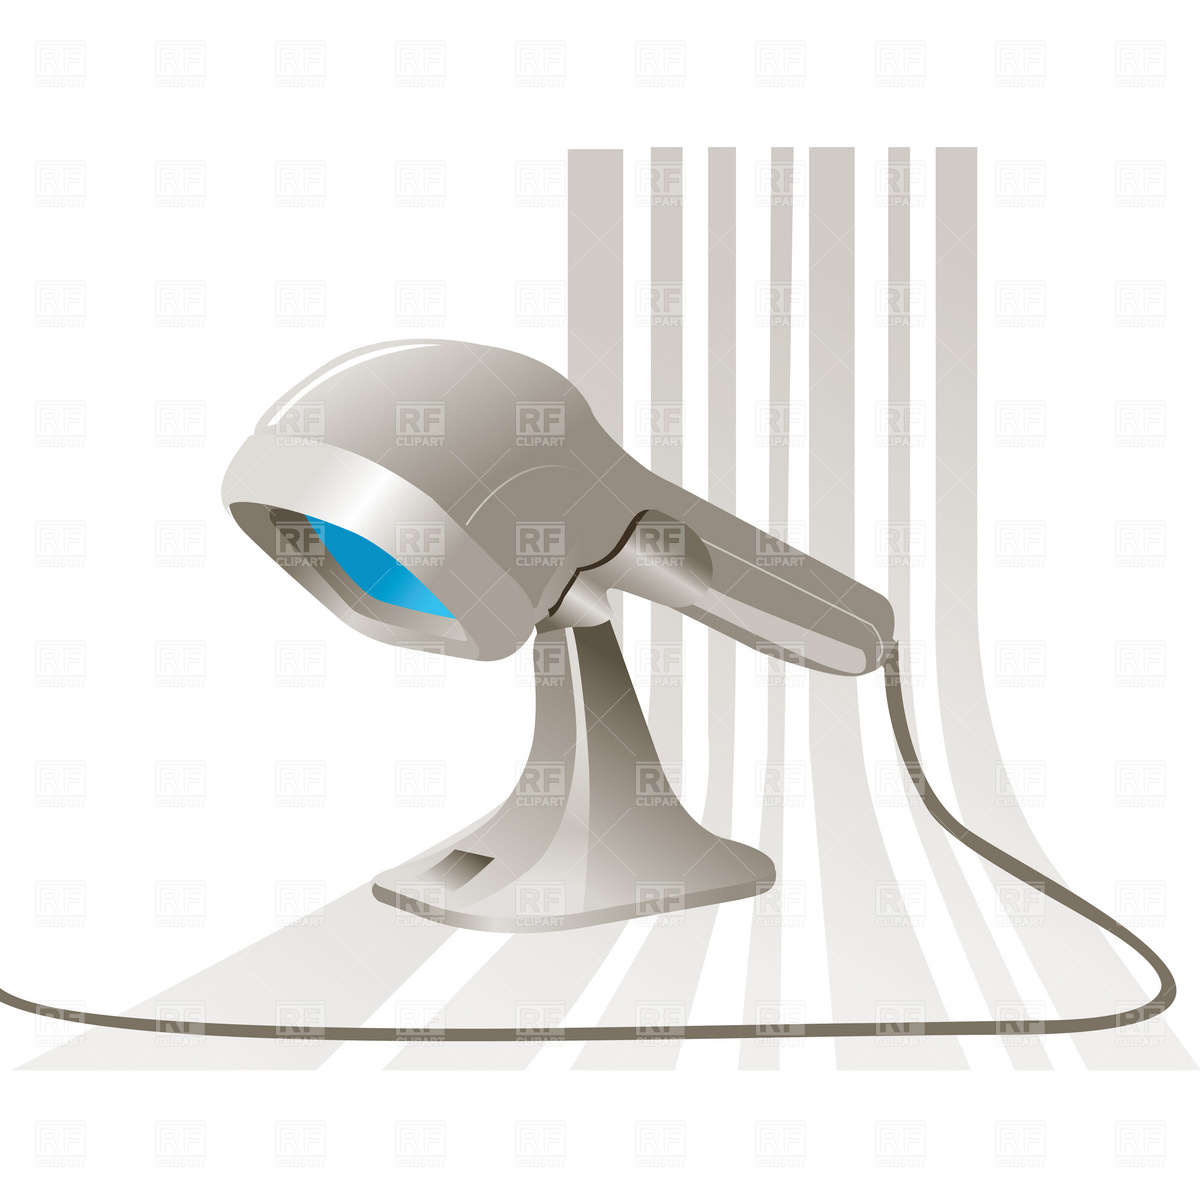 Barcode Scanner 1865 Business Finance Download Royalty Free Vector